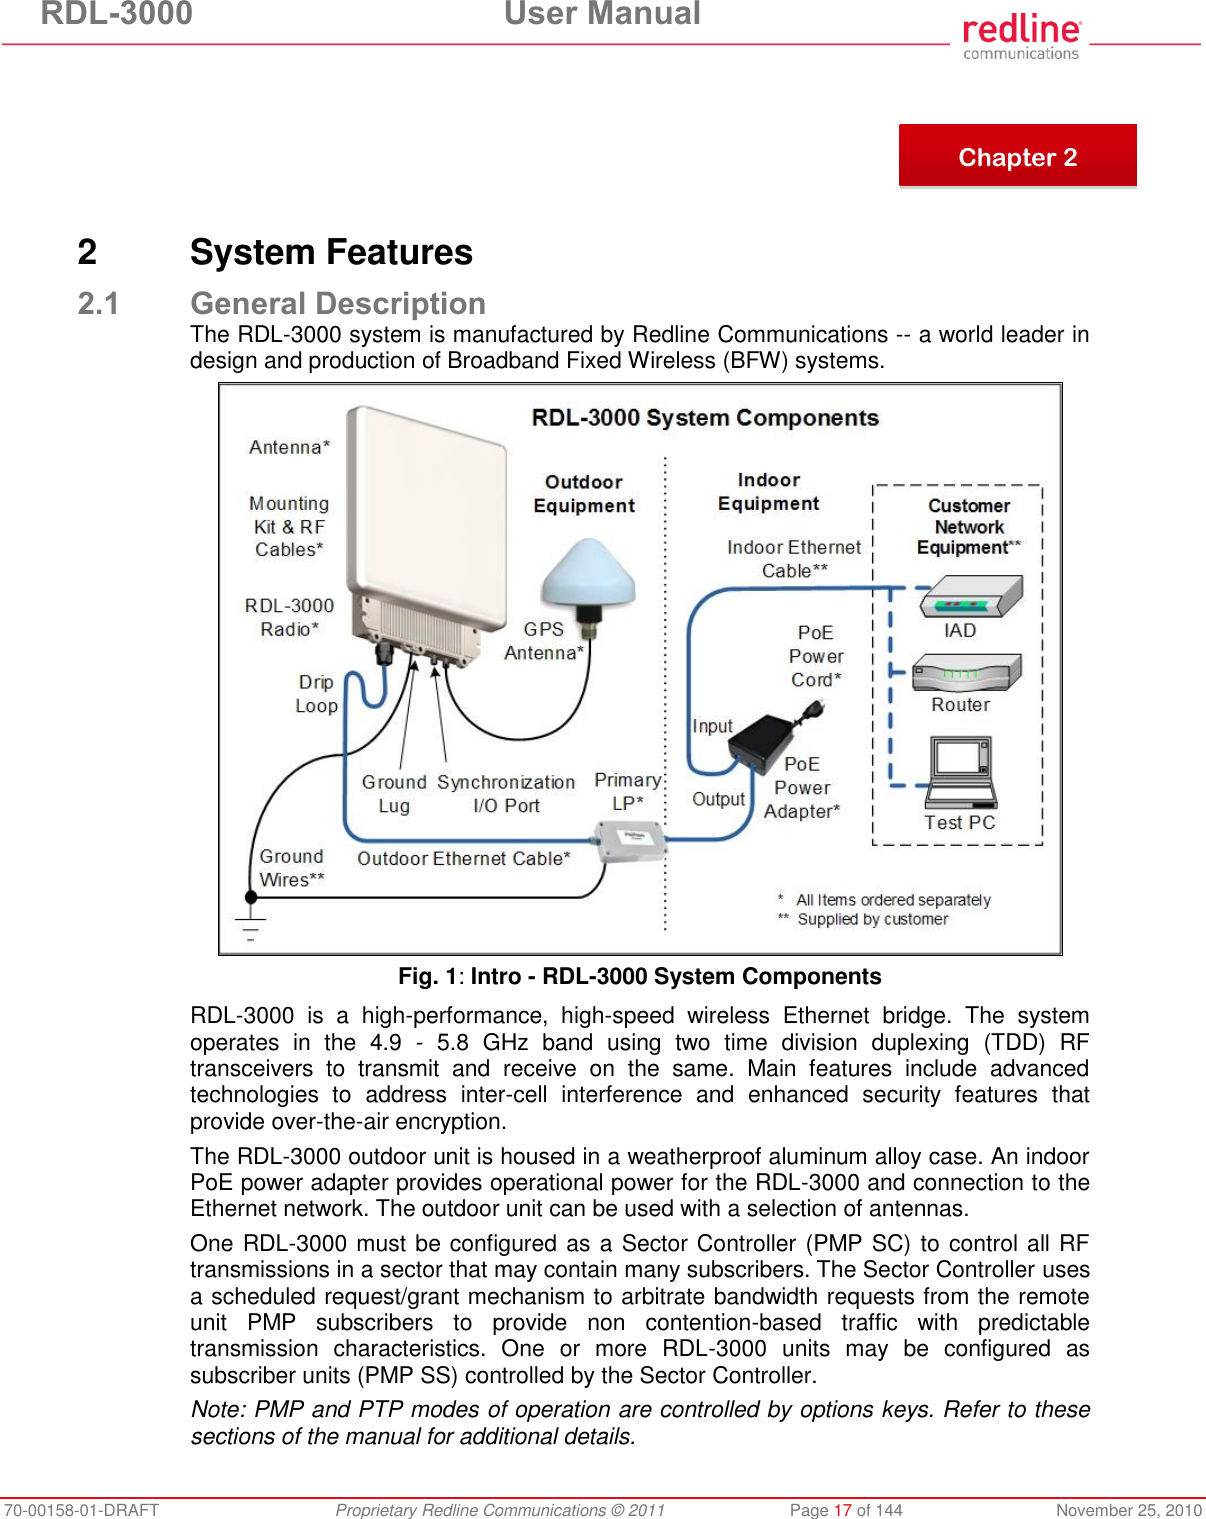 RDL-3000  User Manual 70-00158-01-DRAFT  Proprietary Redline Communications © 2011  Page 17 of 144  November 25, 2010        2  System Features 2.1 General Description The RDL-3000 system is manufactured by Redline Communications -- a world leader in design and production of Broadband Fixed Wireless (BFW) systems.  Fig. 1: Intro - RDL-3000 System Components RDL-3000  is  a  high-performance,  high-speed  wireless  Ethernet  bridge.  The  system operates  in  the  4.9  -  5.8  GHz  band  using  two  time  division  duplexing  (TDD)  RF transceivers  to  transmit  and  receive  on  the  same.  Main  features  include  advanced technologies  to  address  inter-cell  interference  and  enhanced  security  features  that provide over-the-air encryption.  The RDL-3000 outdoor unit is housed in a weatherproof aluminum alloy case. An indoor PoE power adapter provides operational power for the RDL-3000 and connection to the Ethernet network. The outdoor unit can be used with a selection of antennas. One RDL-3000 must be configured as a Sector Controller (PMP SC) to control all RF transmissions in a sector that may contain many subscribers. The Sector Controller uses a scheduled request/grant mechanism to arbitrate bandwidth requests from the remote unit  PMP  subscribers  to  provide  non  contention-based  traffic  with  predictable transmission  characteristics.  One  or  more  RDL-3000  units  may  be  configured  as subscriber units (PMP SS) controlled by the Sector Controller.  Note: PMP and PTP modes of operation are controlled by options keys. Refer to these sections of the manual for additional details.   Chapter 2 